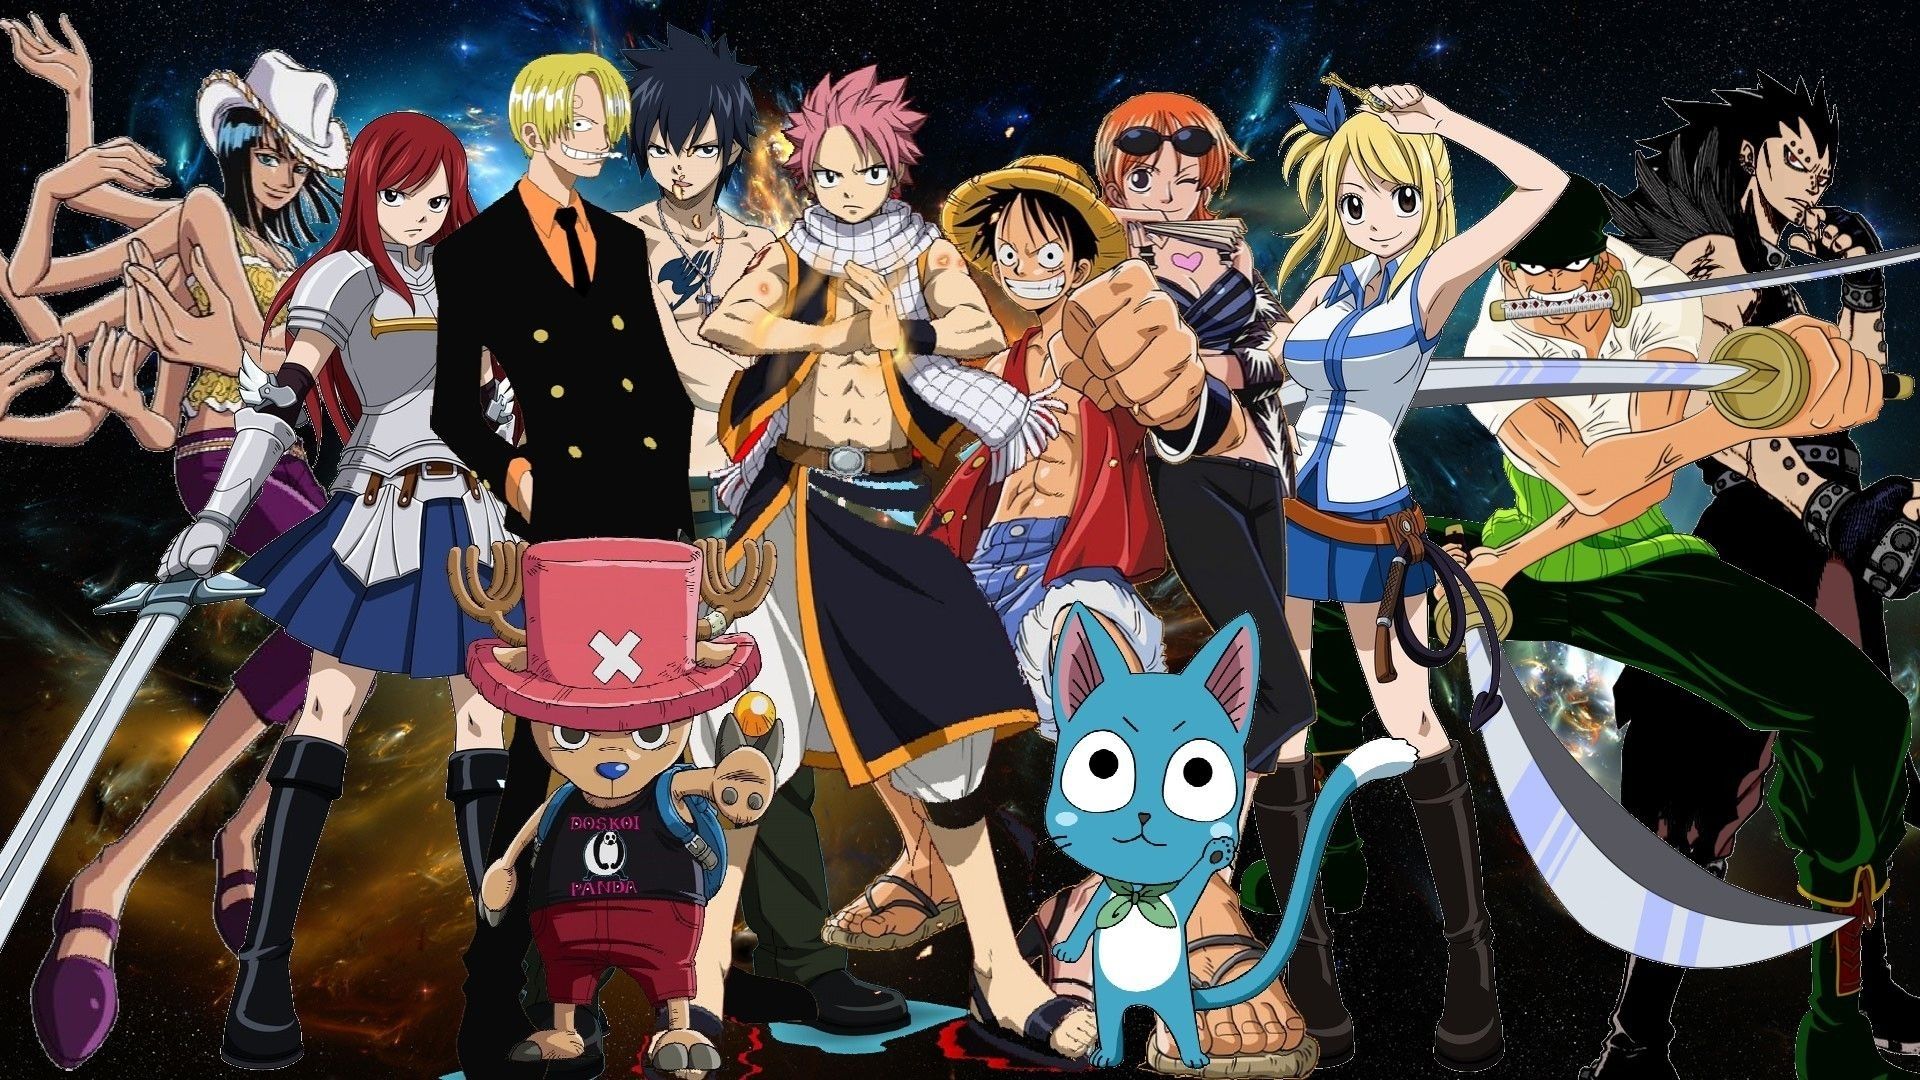 Fairy Tail PC Wallpapers   Top Free Fairy Tail PC Backgrounds